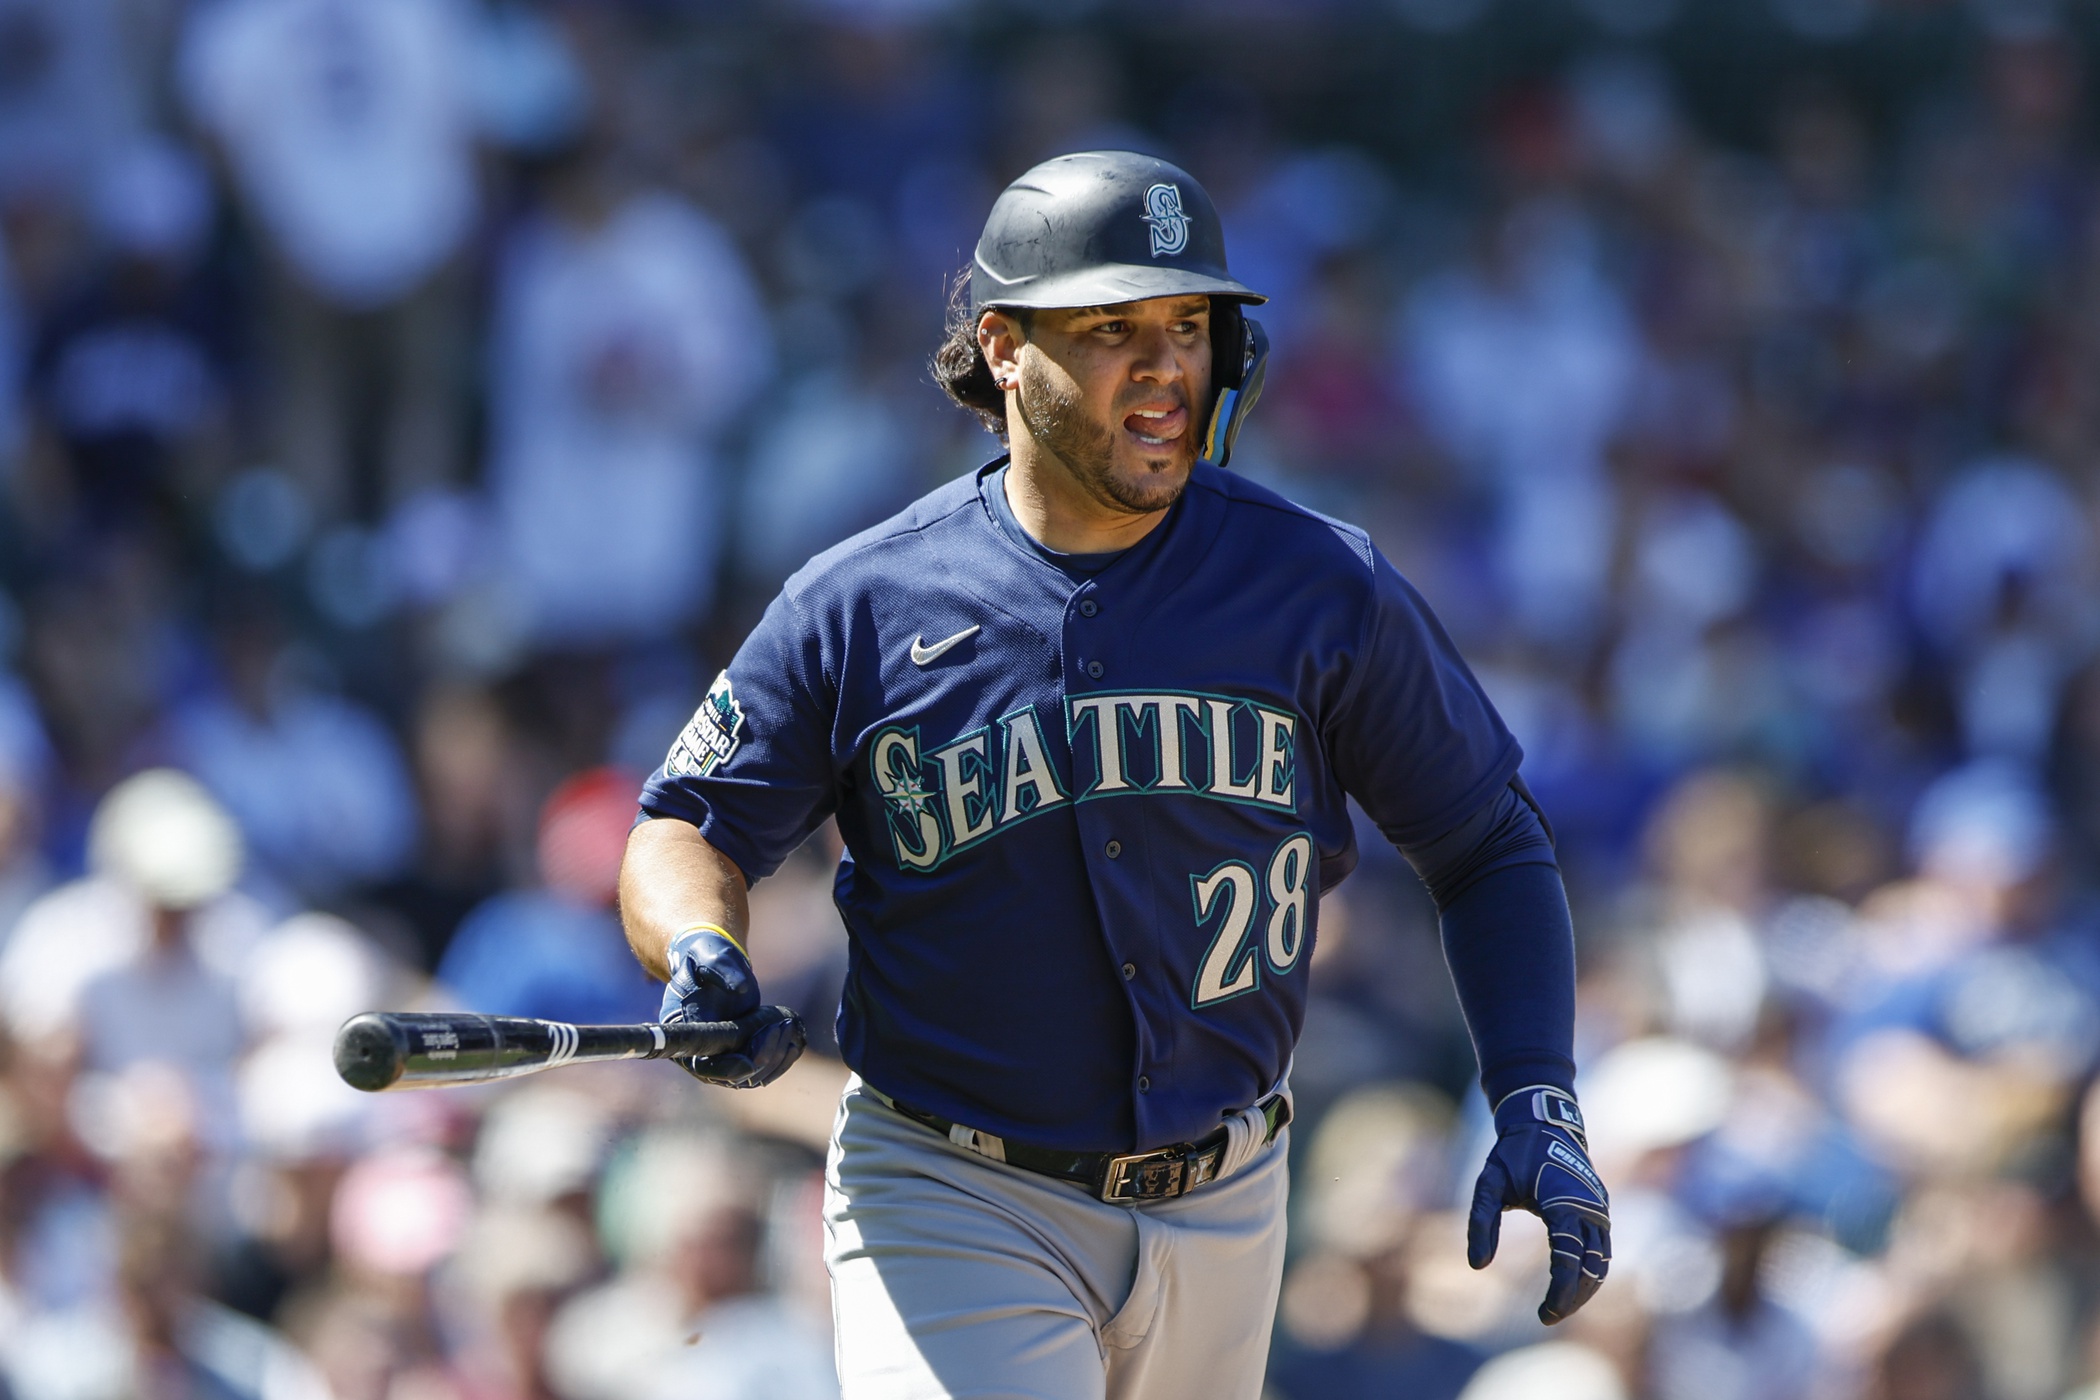 Mariners OF Trammell out 6-7 weeks with broken hand